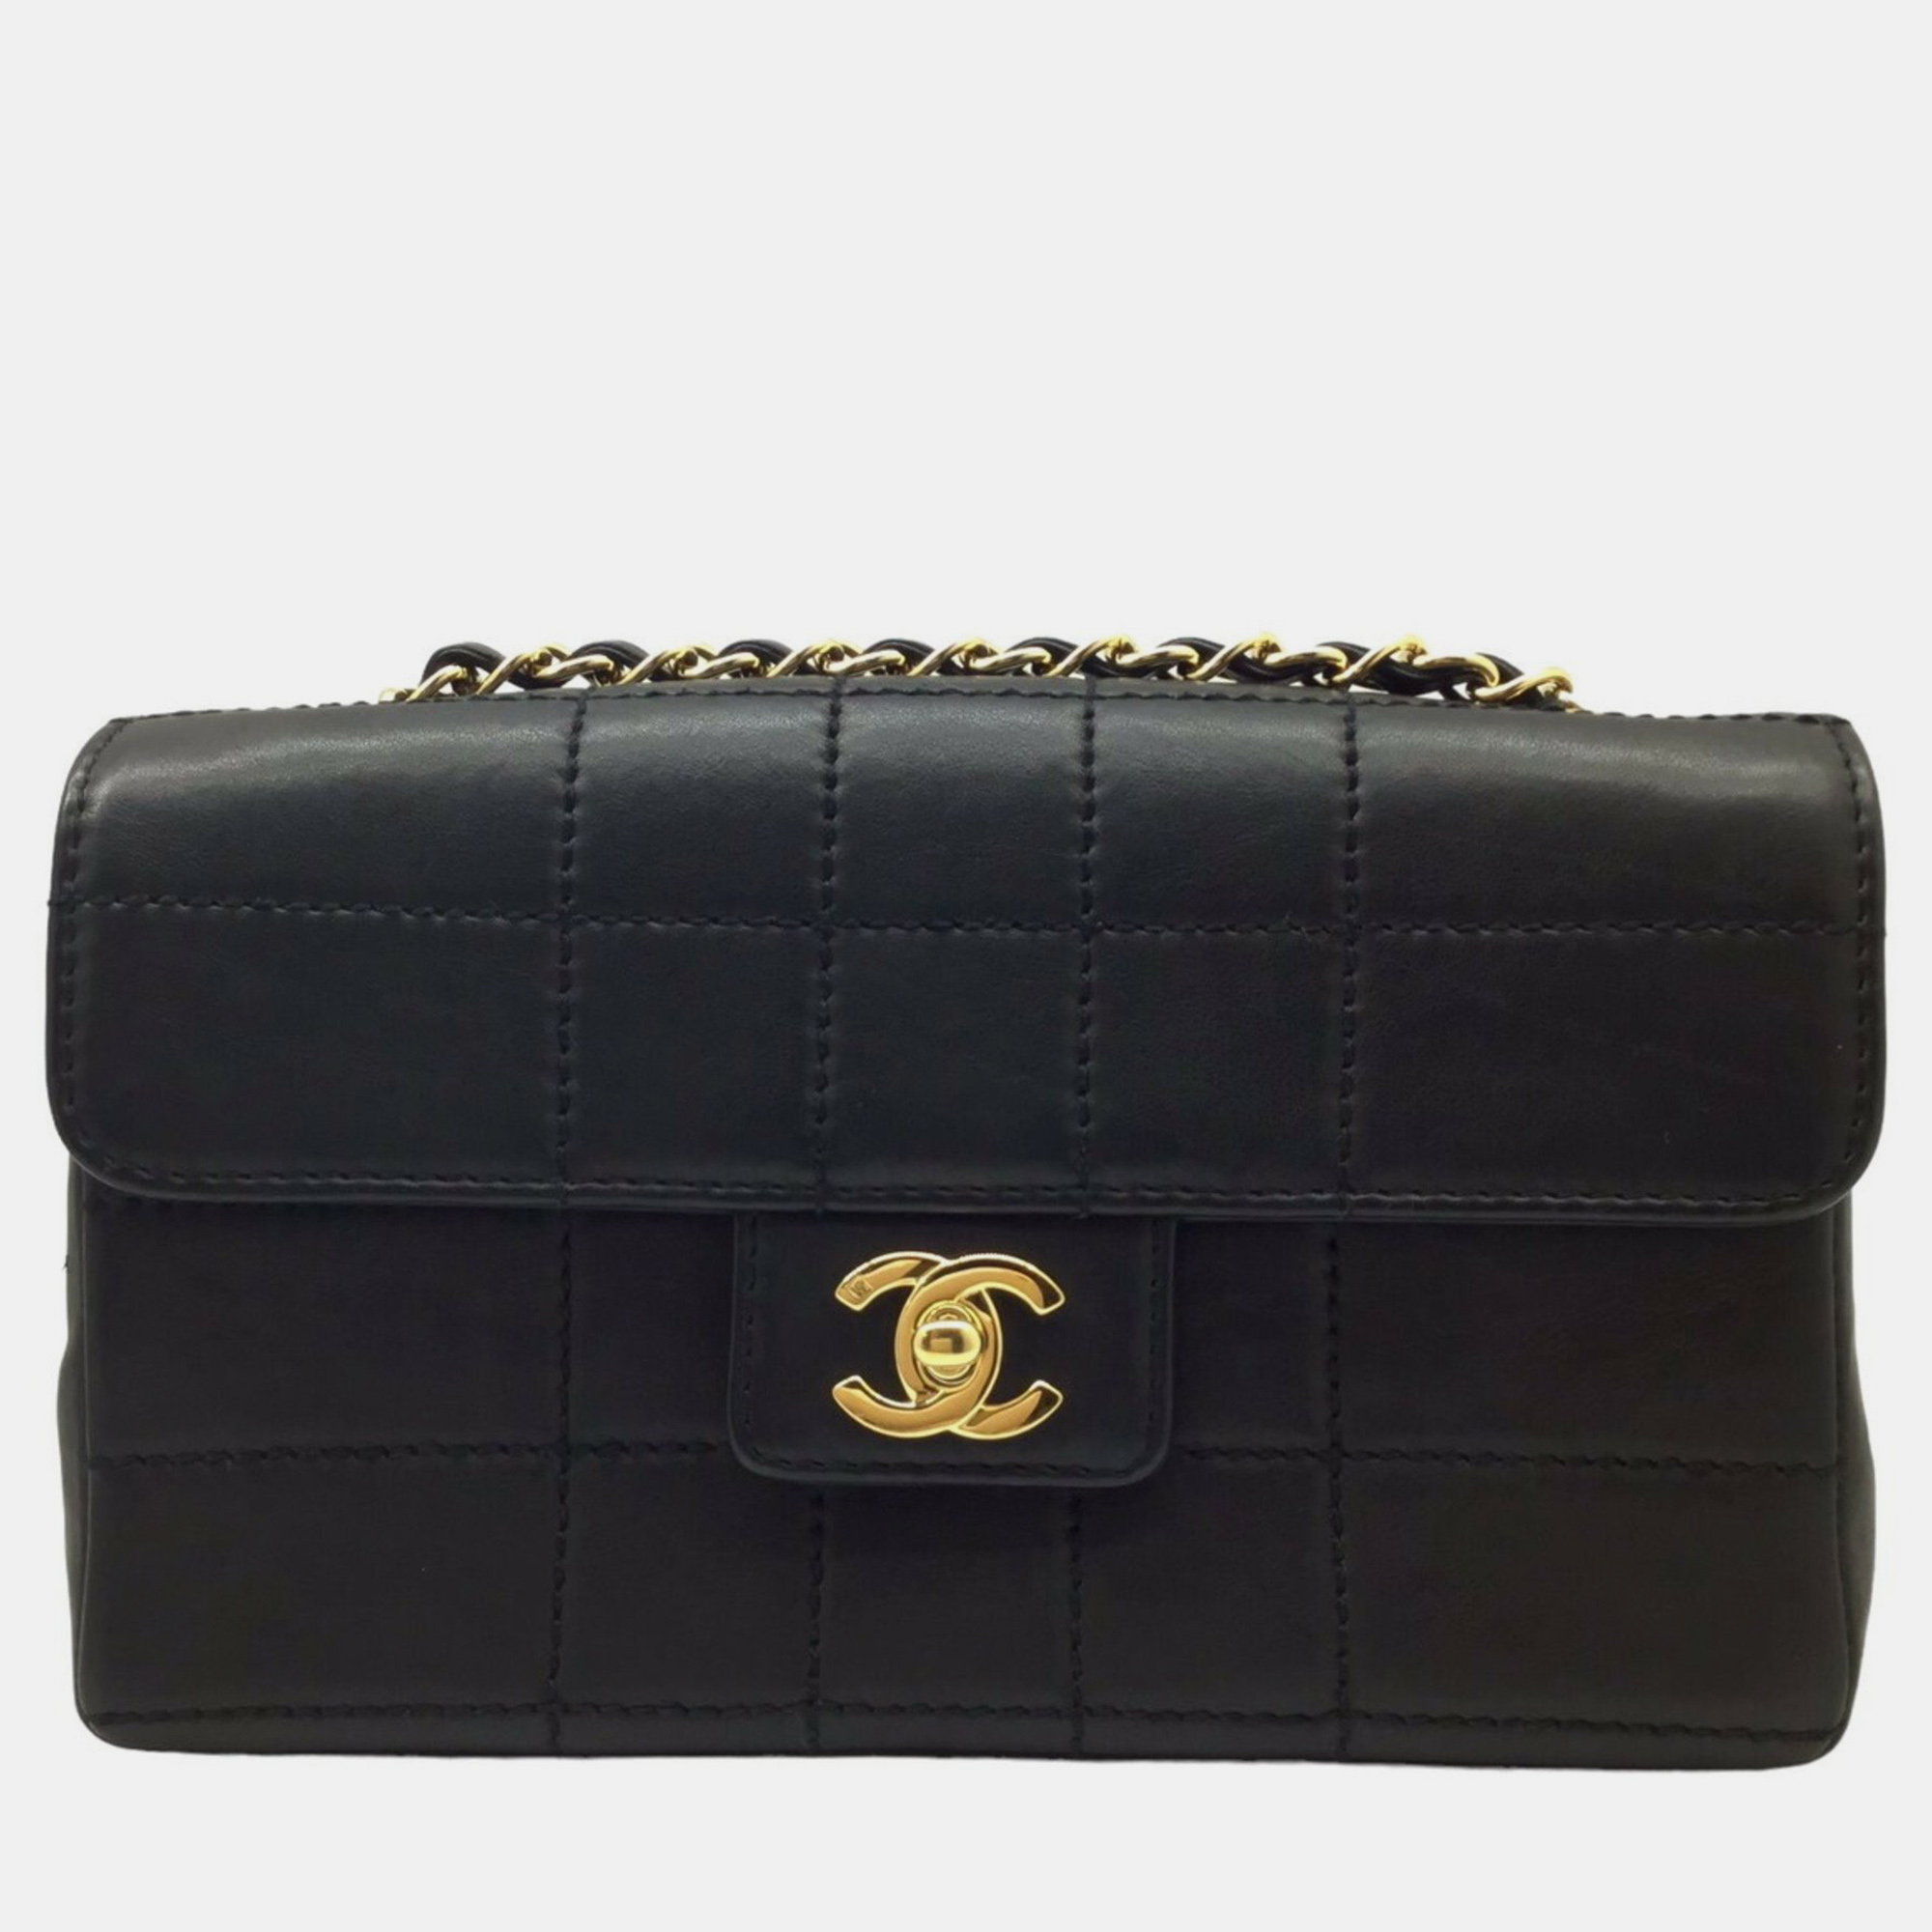 Chanel black quilted lambskin chocolate bar small classic single flap